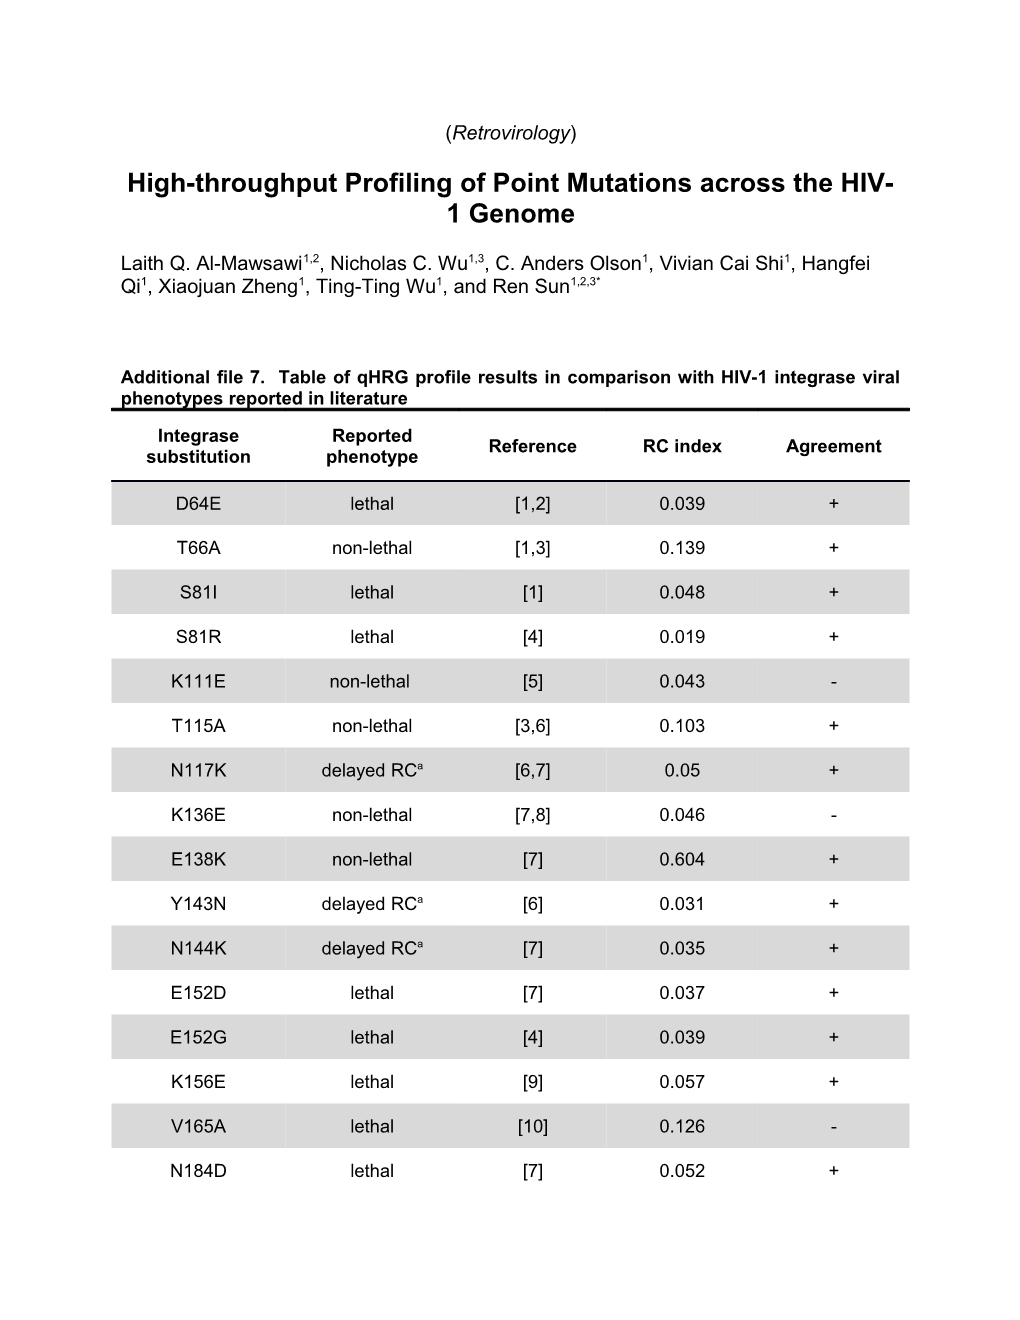 High-Throughput Profiling of Point Mutations Across the HIV-1 Genome